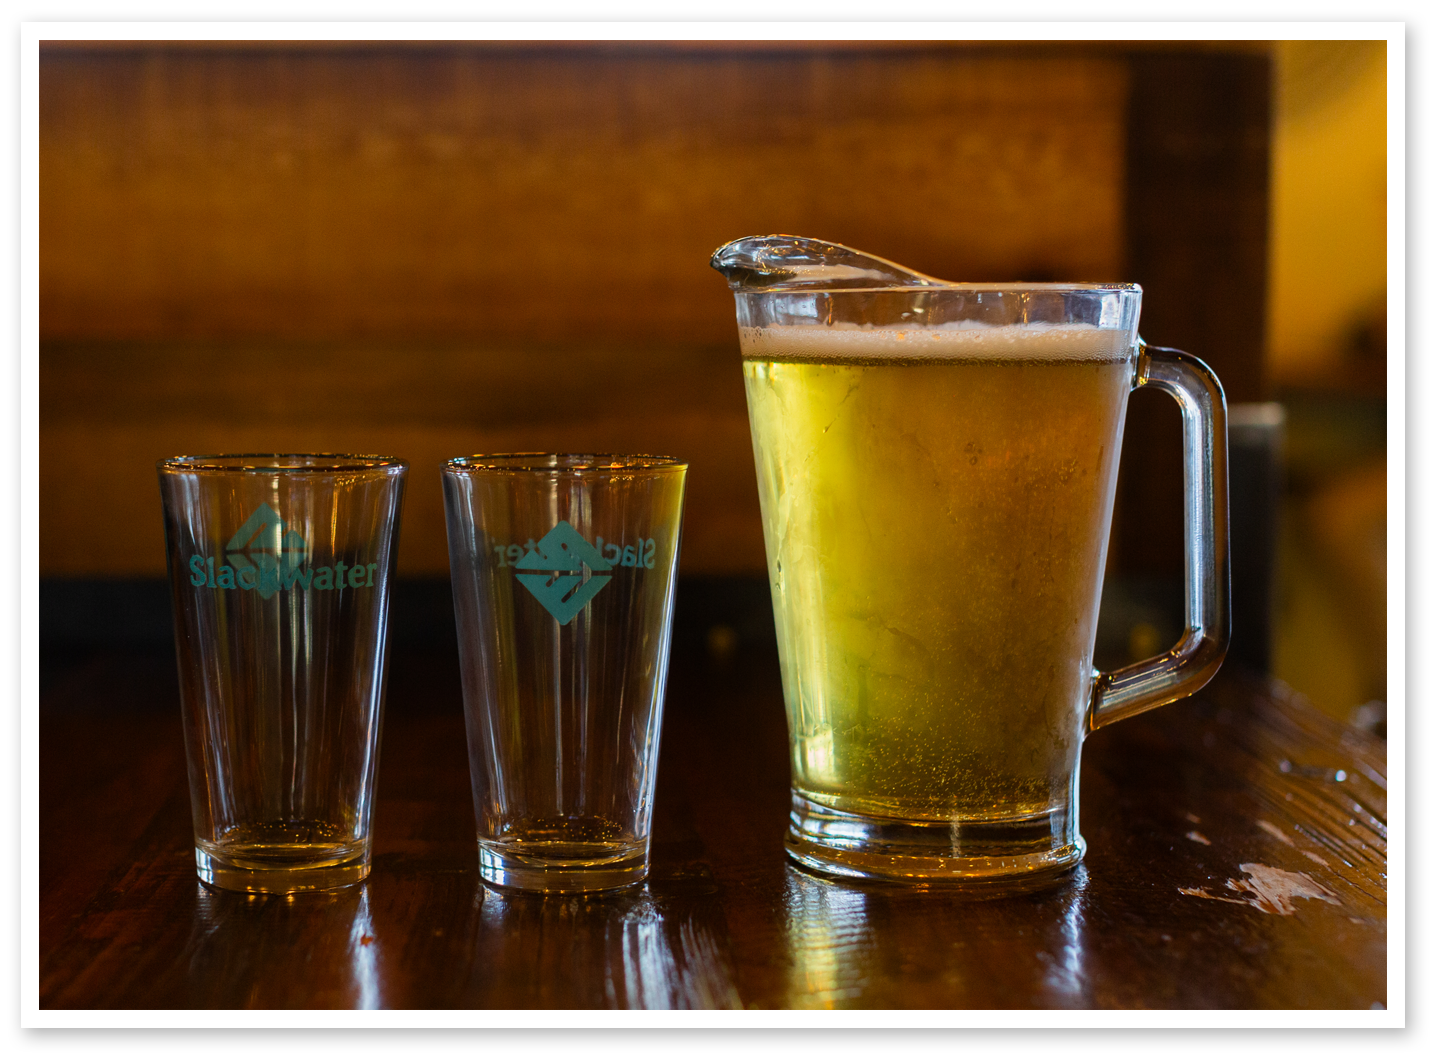 Slackwater Pitcher of Beer and Glasses